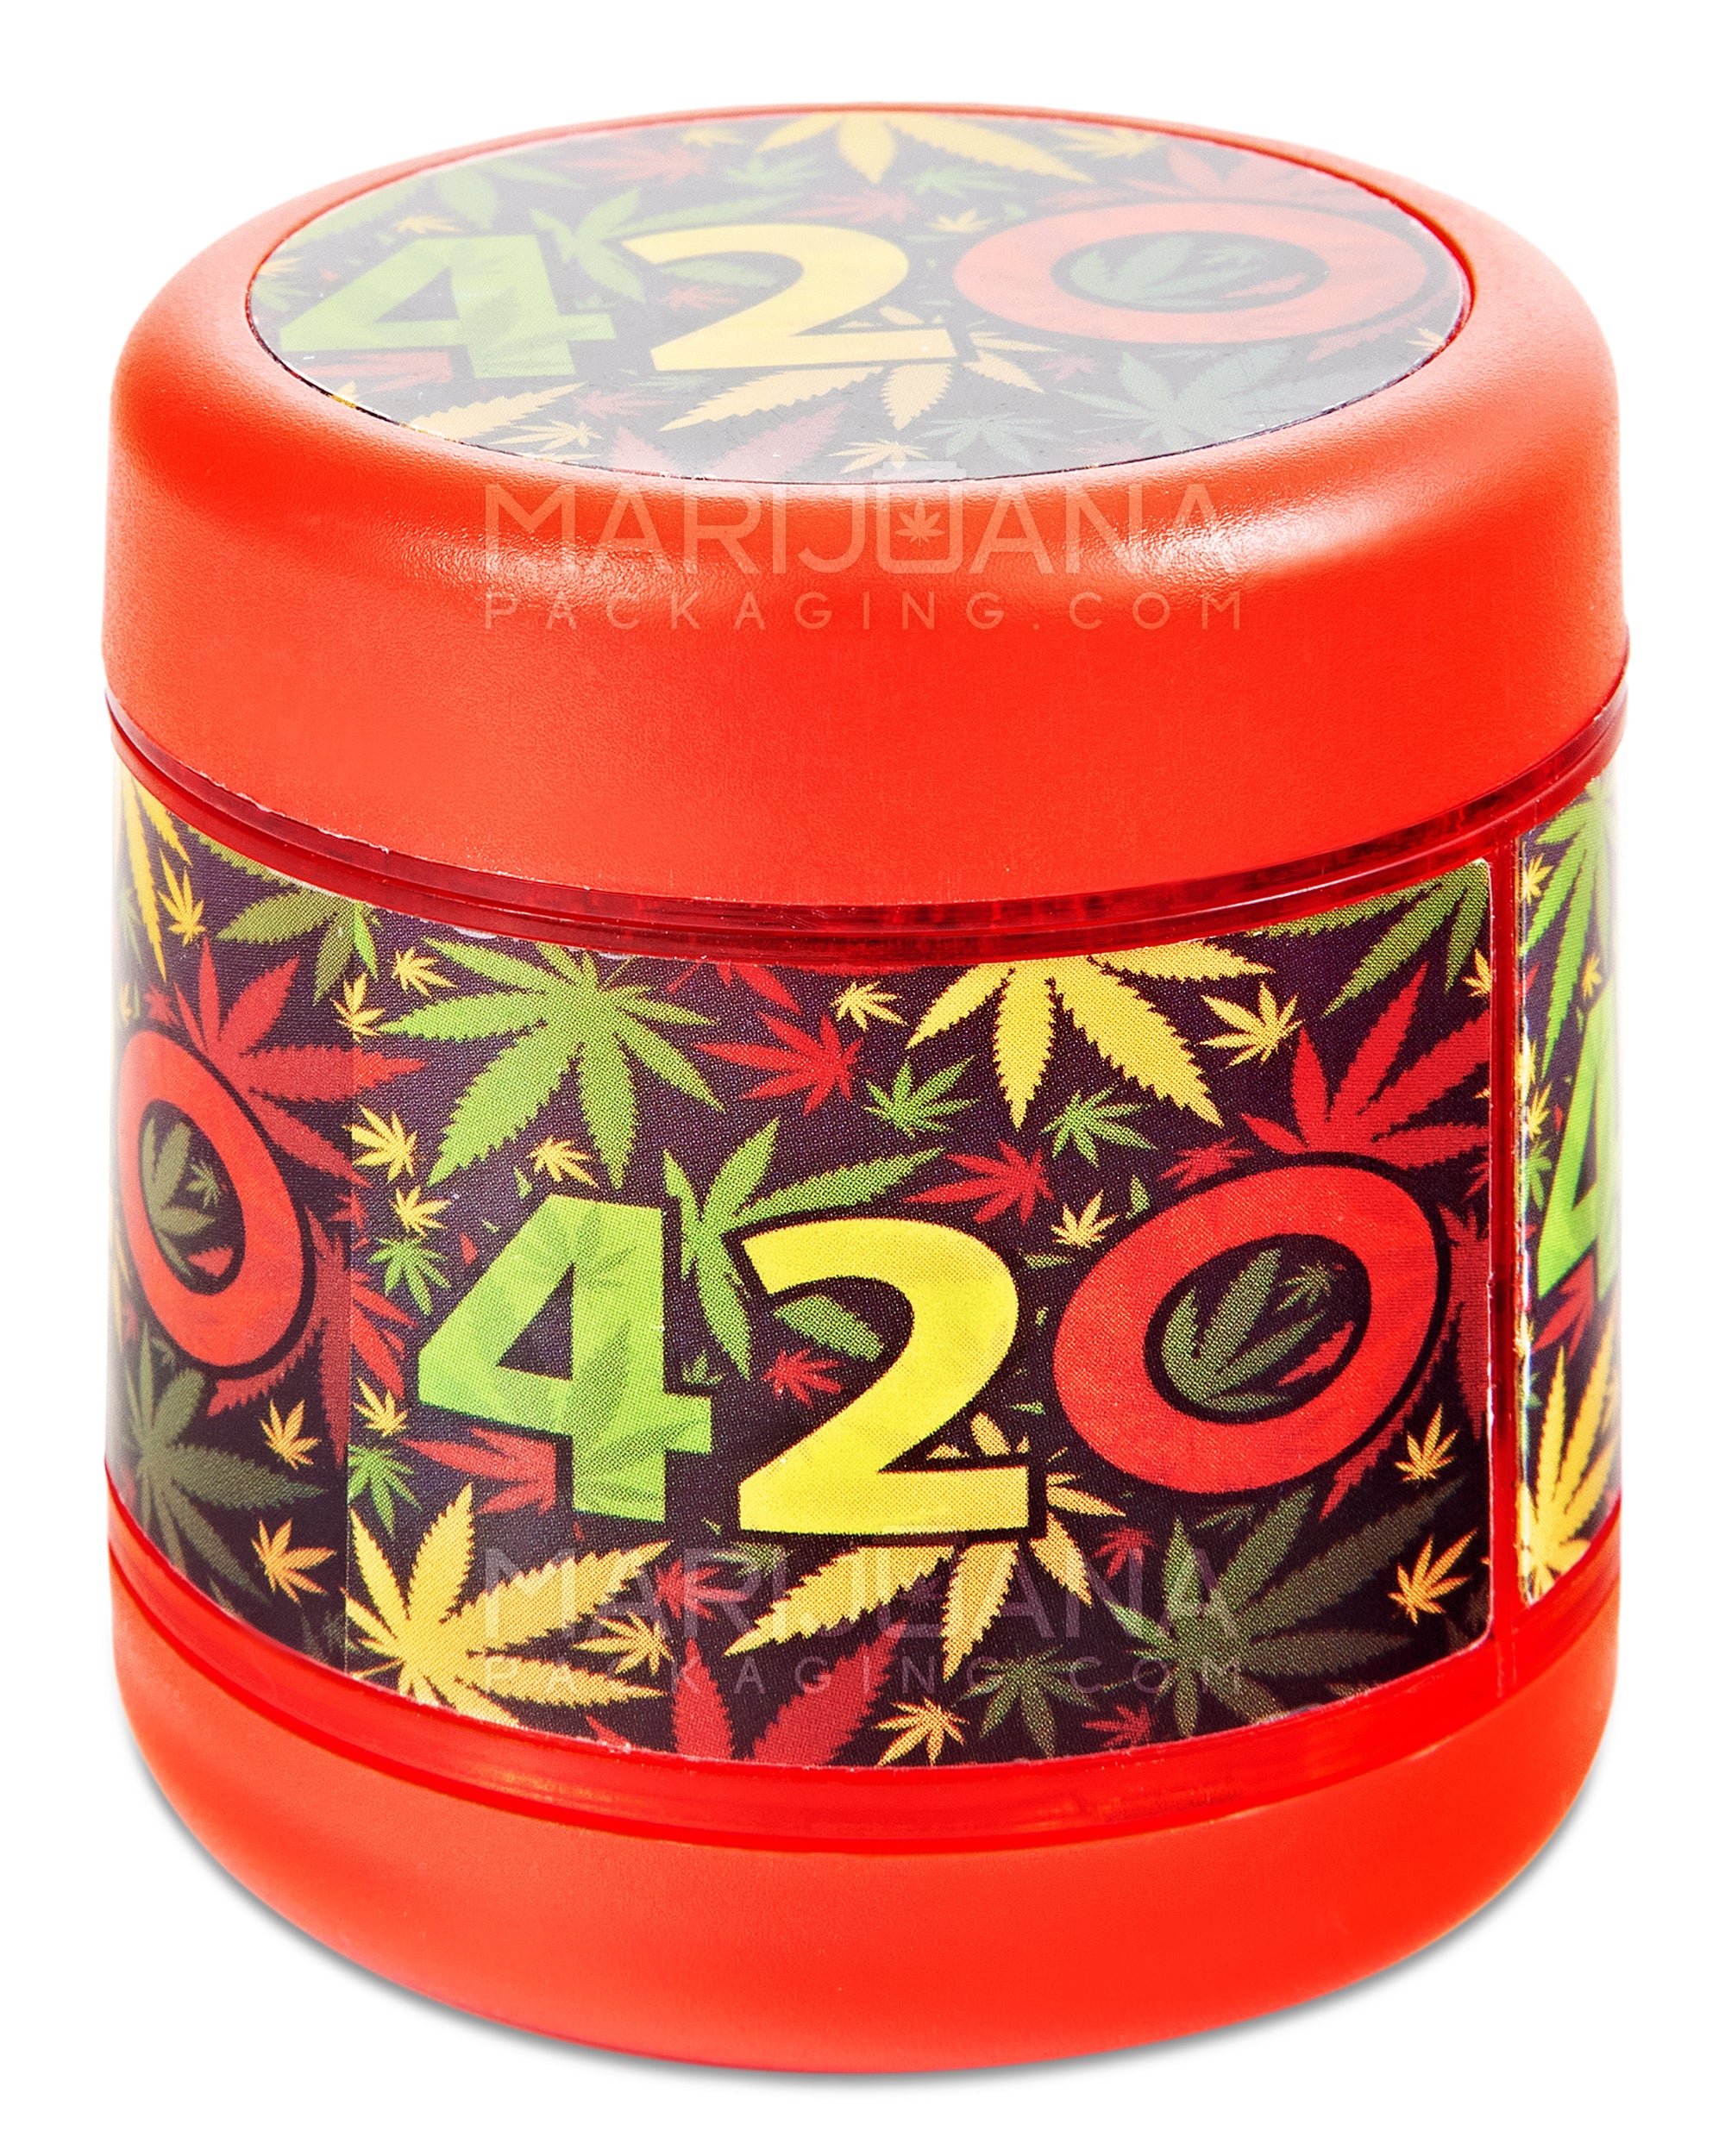 Concentrate Container Magnetic Box with Display Window - 420 Packaging